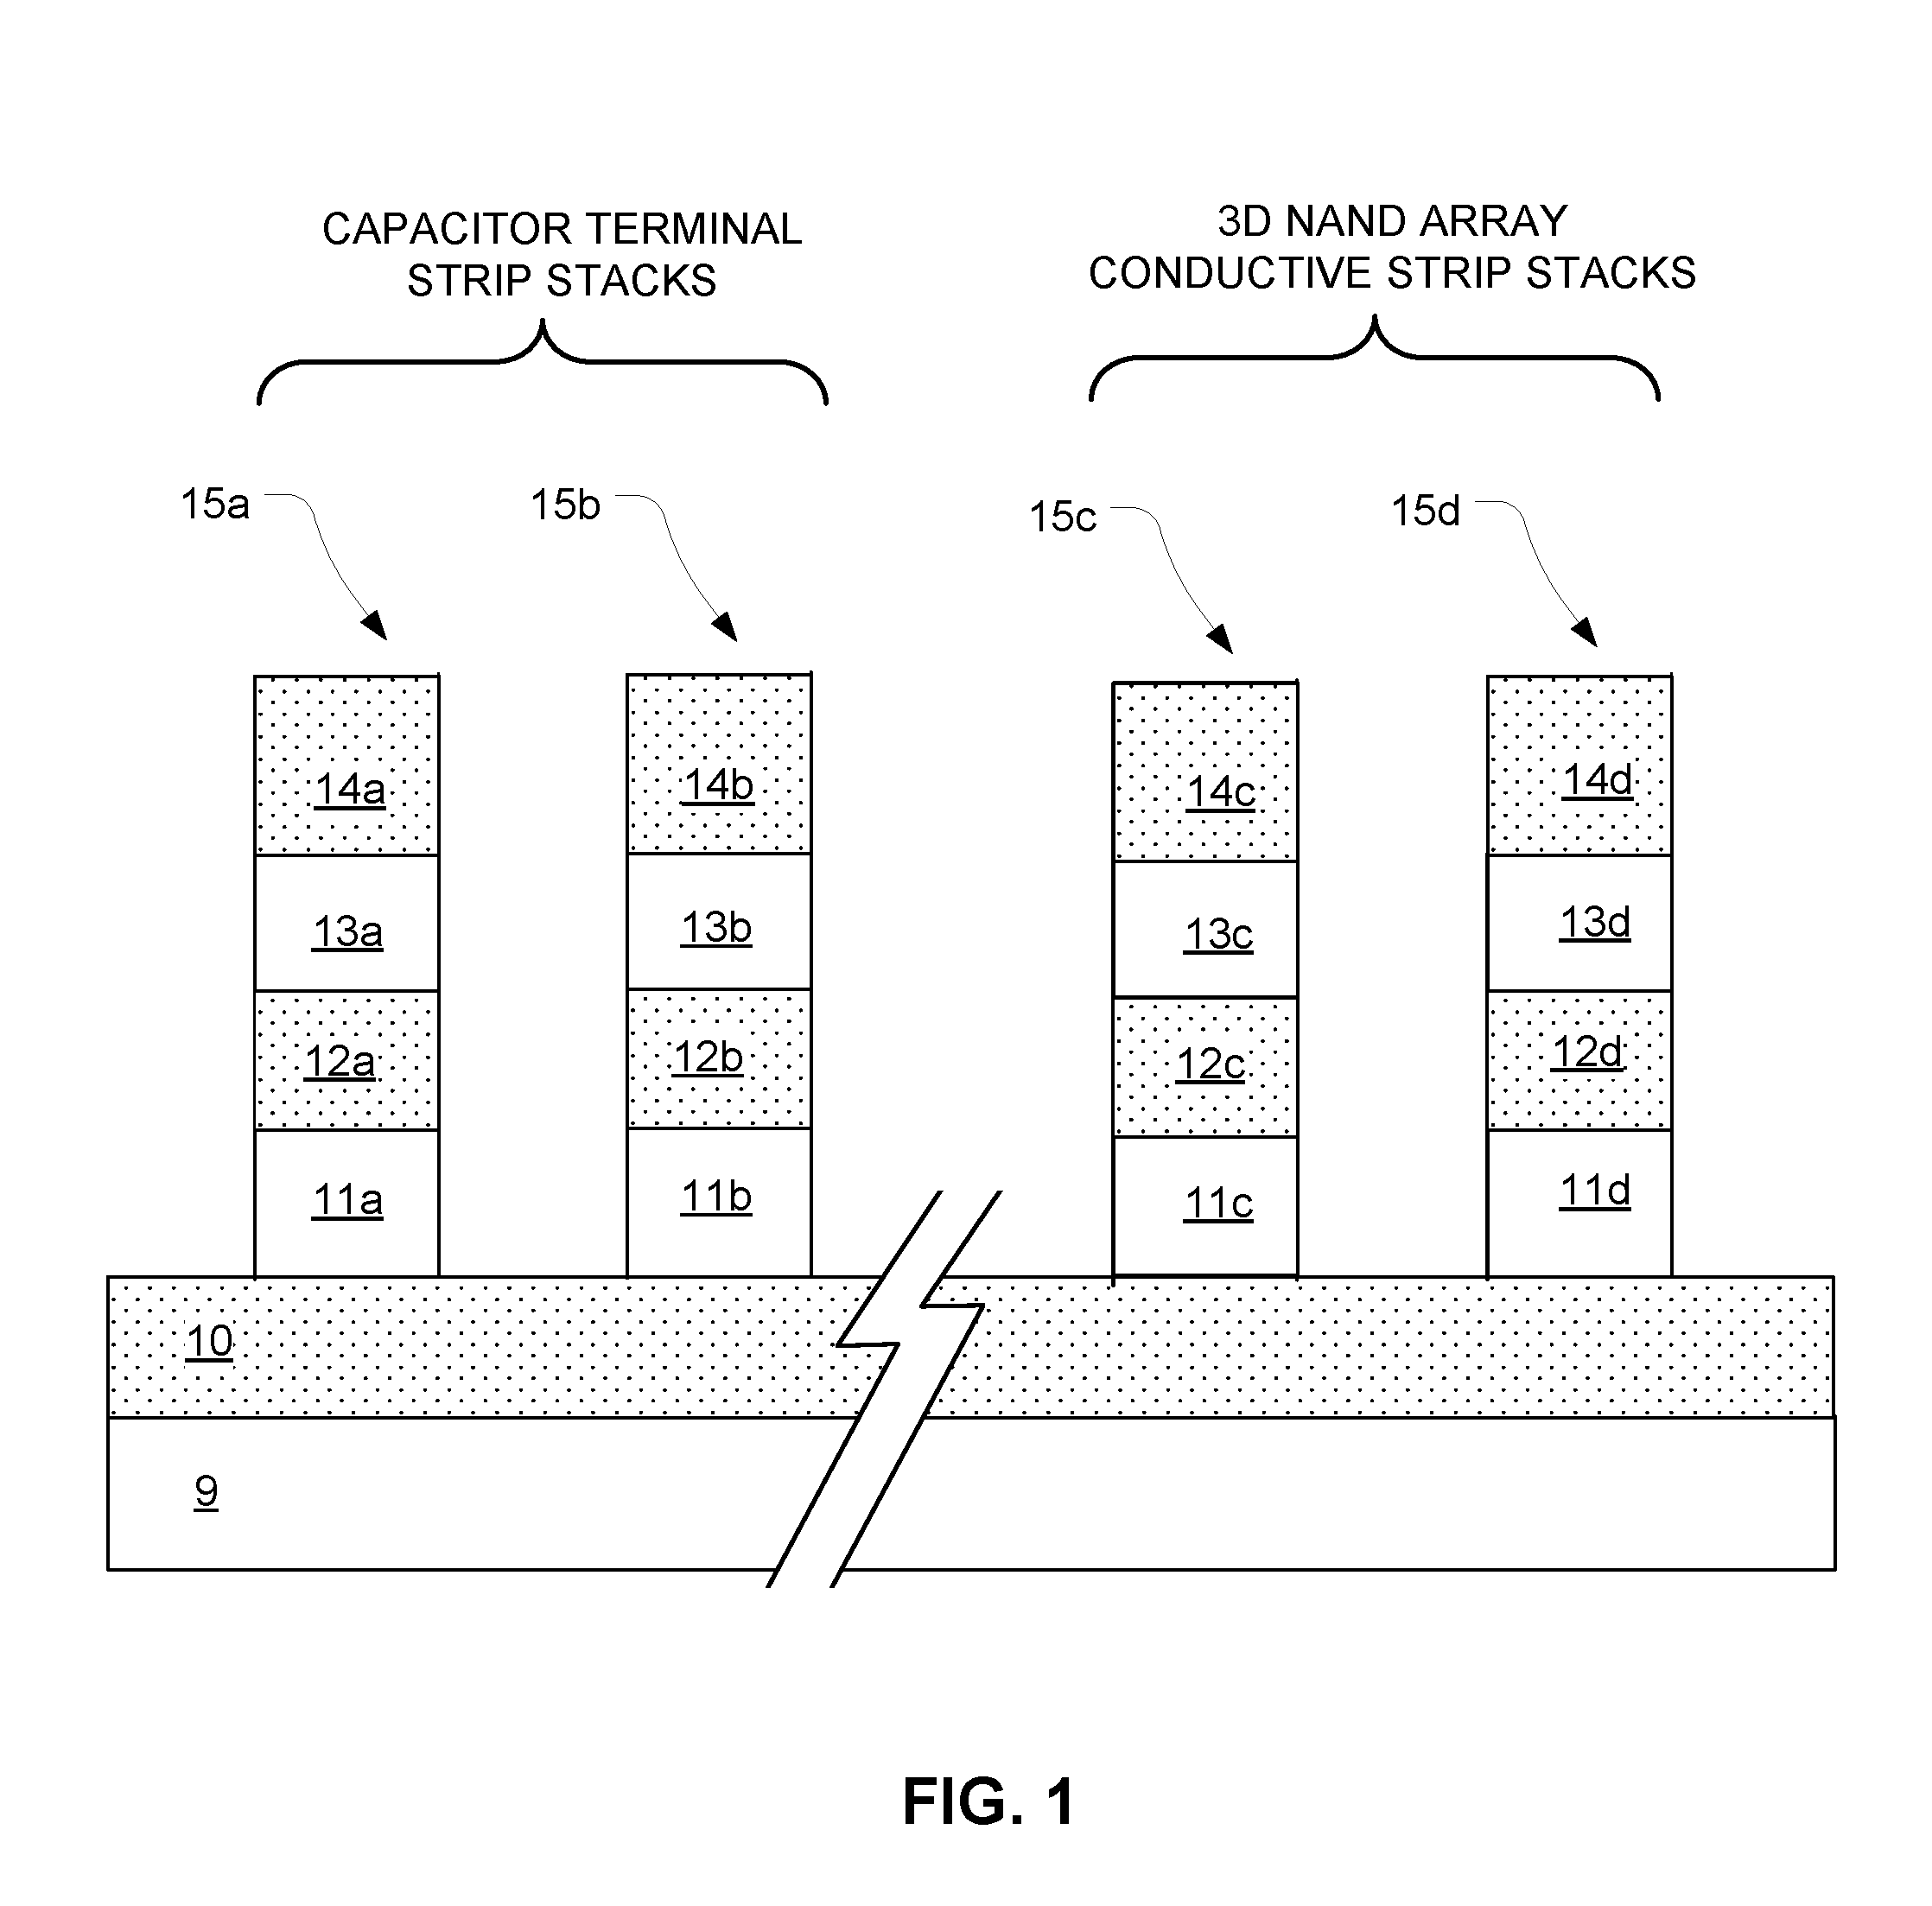 Capacitor With 3D NAND Memory